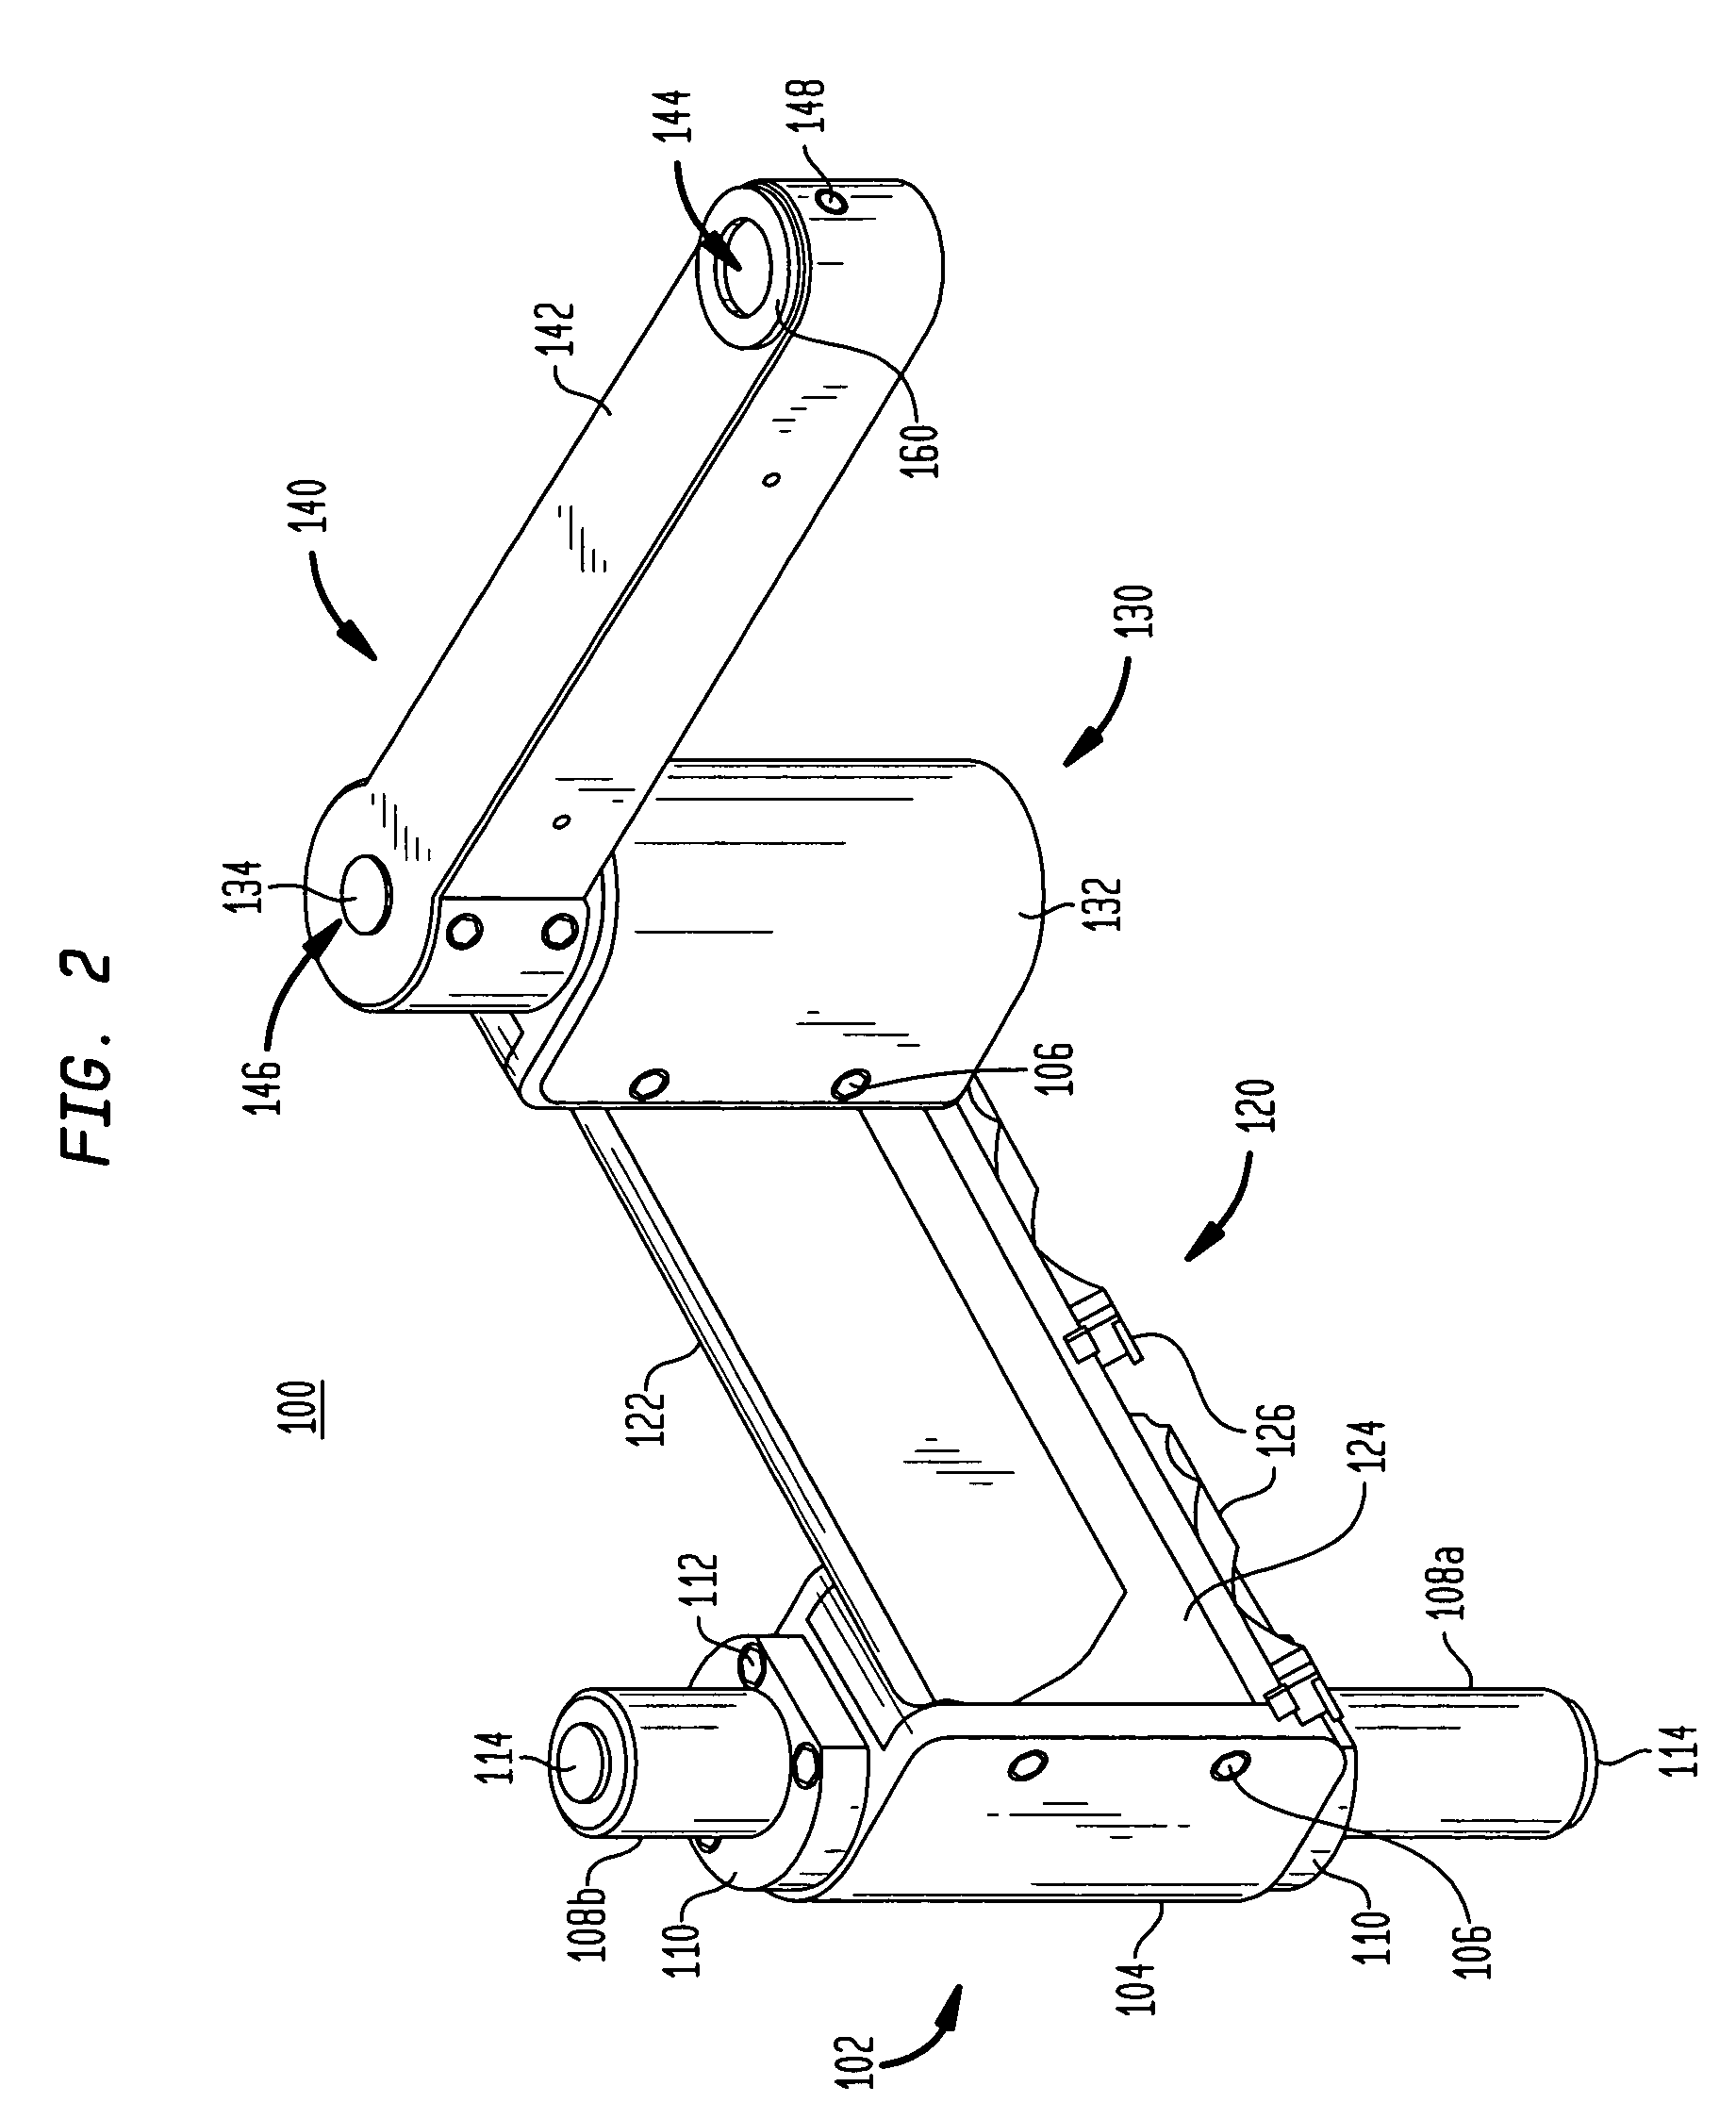 Tilter apparatus for electronic device having bias assembly